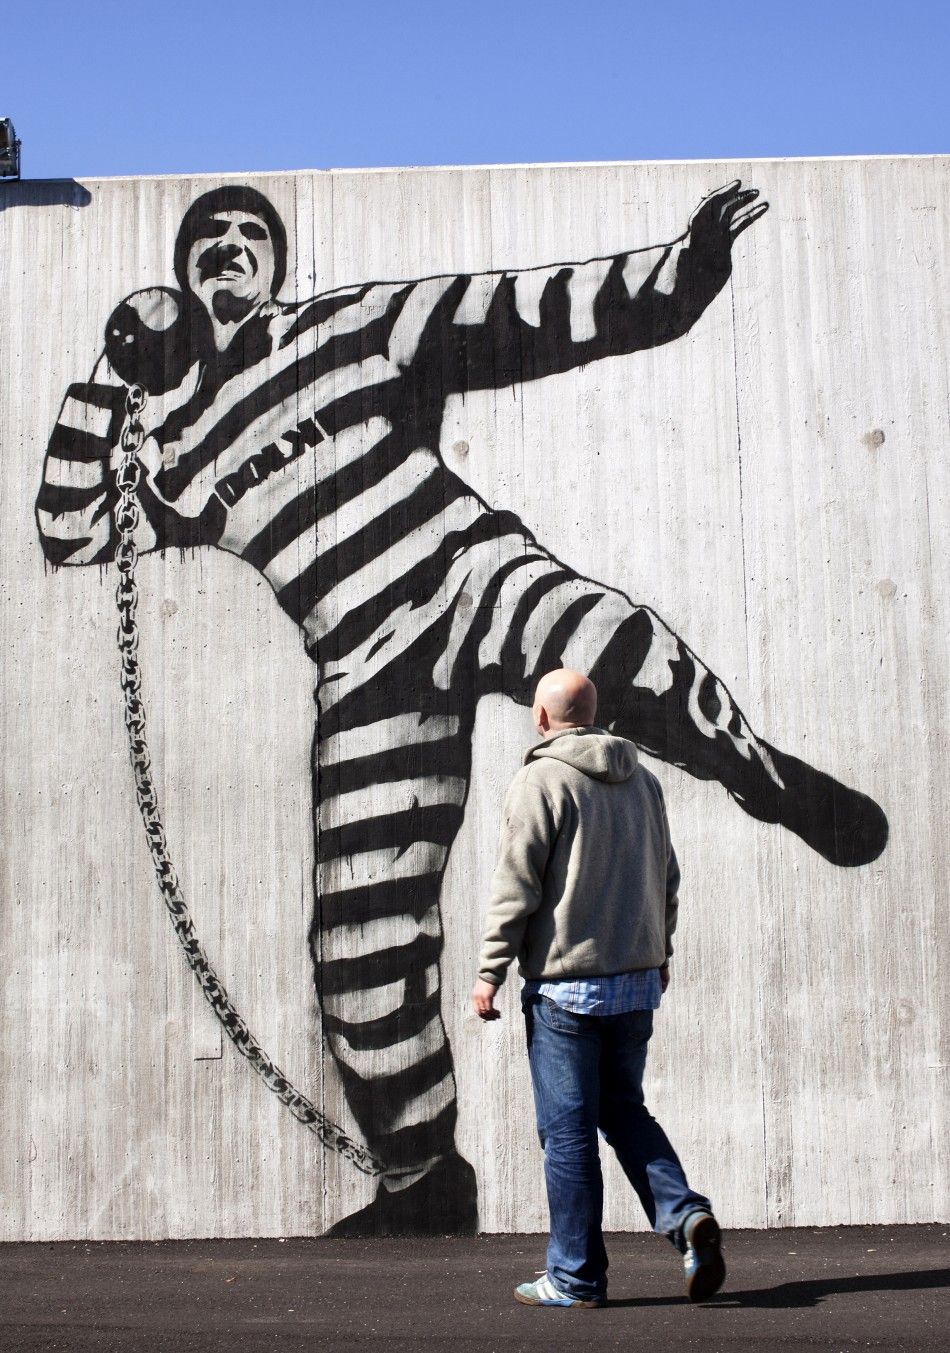 A man walks in front of graffiti inside Halden prison in the far southeast of Norway in this picture taken in 2010, released on July 27, 2011